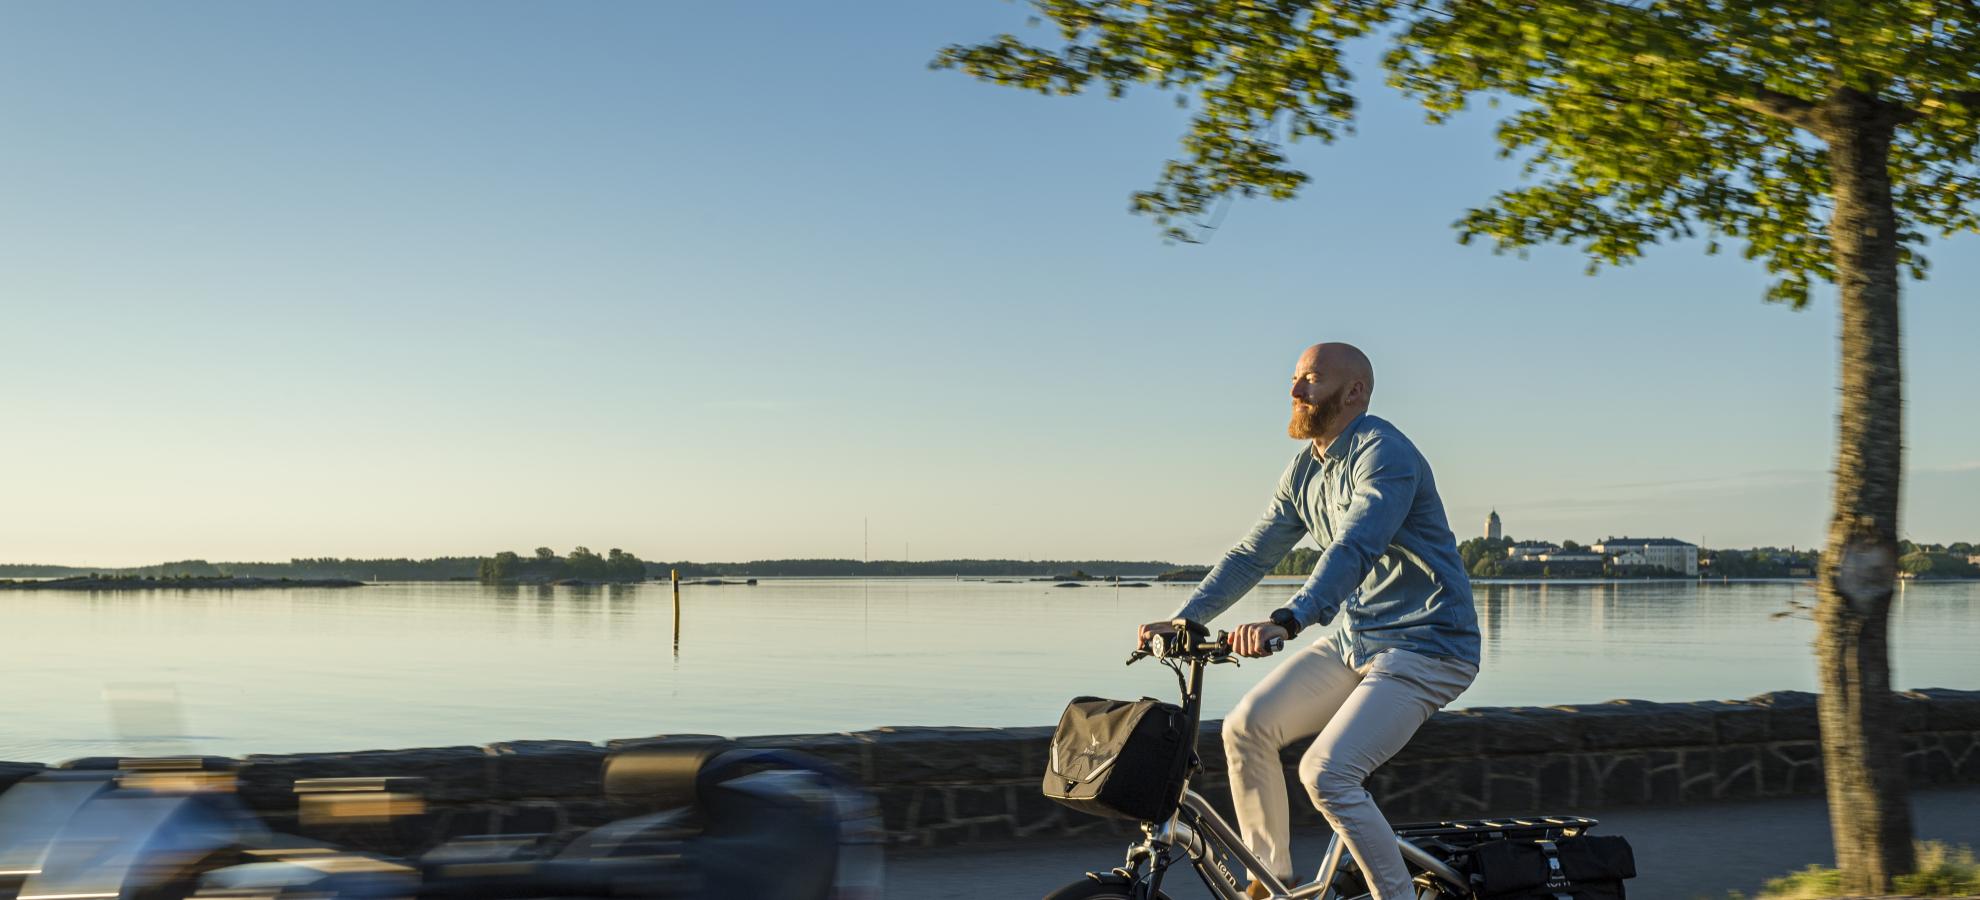 A man is cycling to the left of the photo on the path running by the Kaivopuisto shore, where the sea beyond is flat calm and the sun is shining.